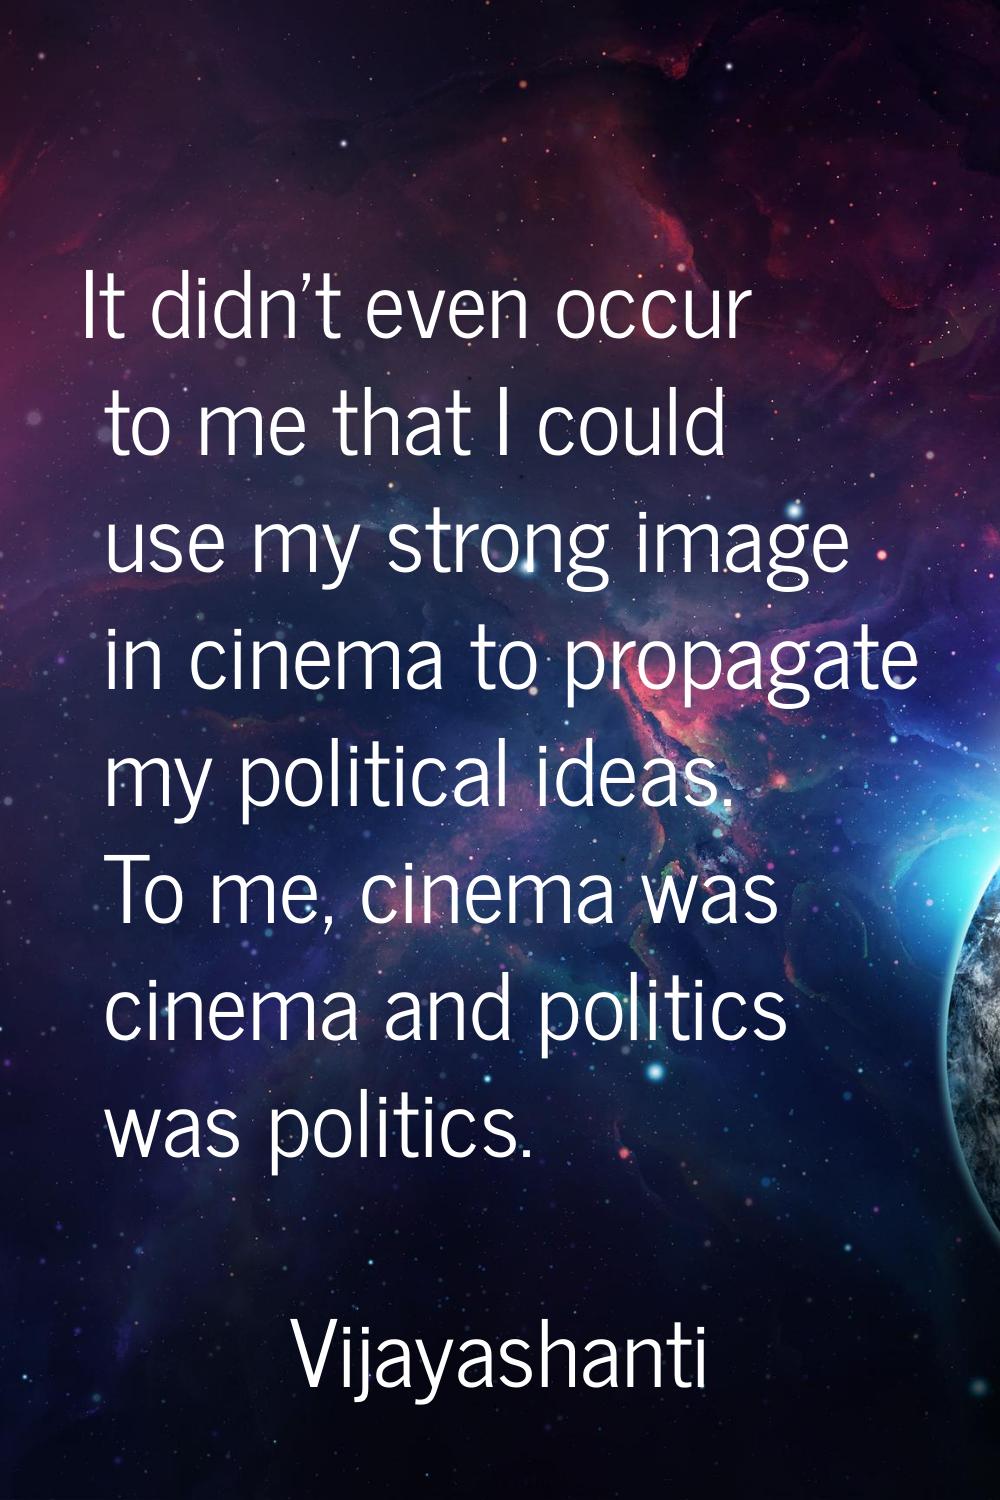 It didn't even occur to me that I could use my strong image in cinema to propagate my political ide